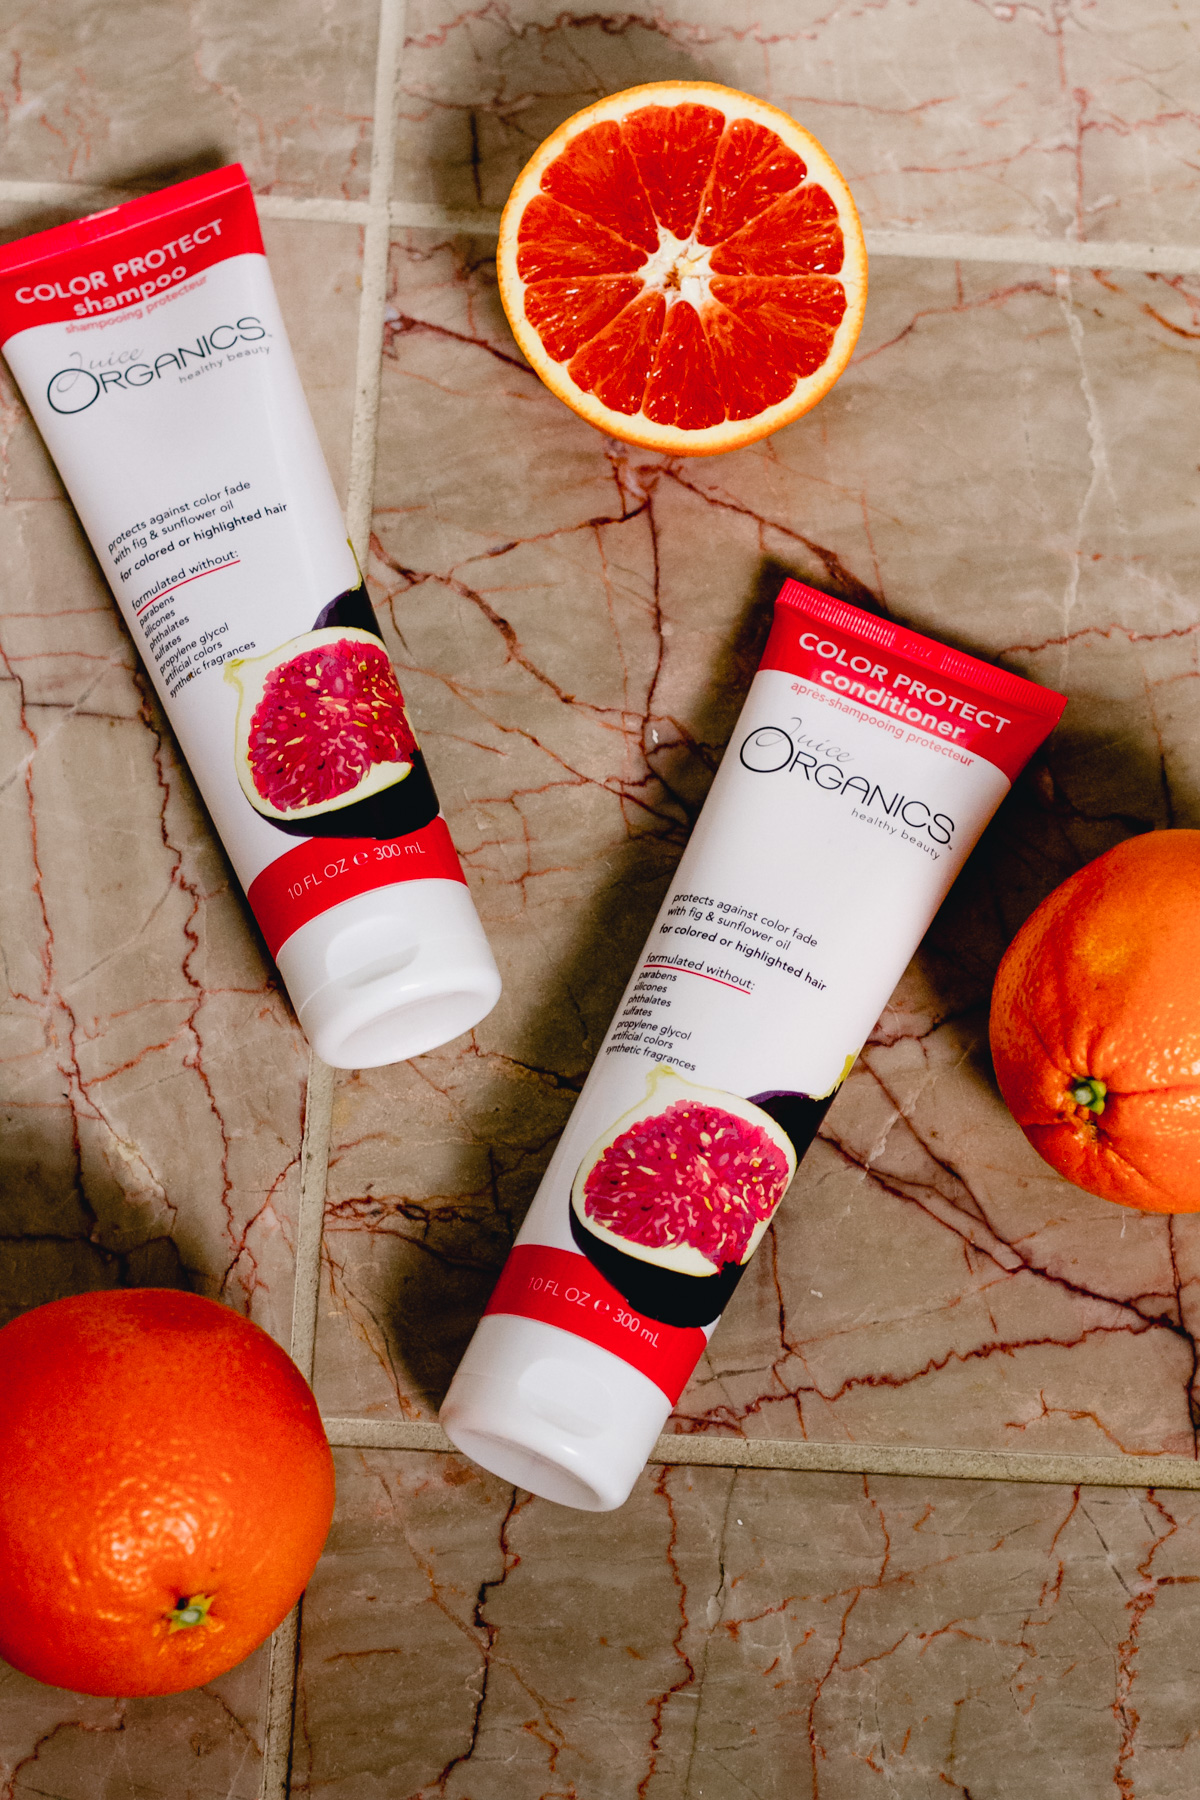 Juice Organics Color Protect Shampoo and Conditioner